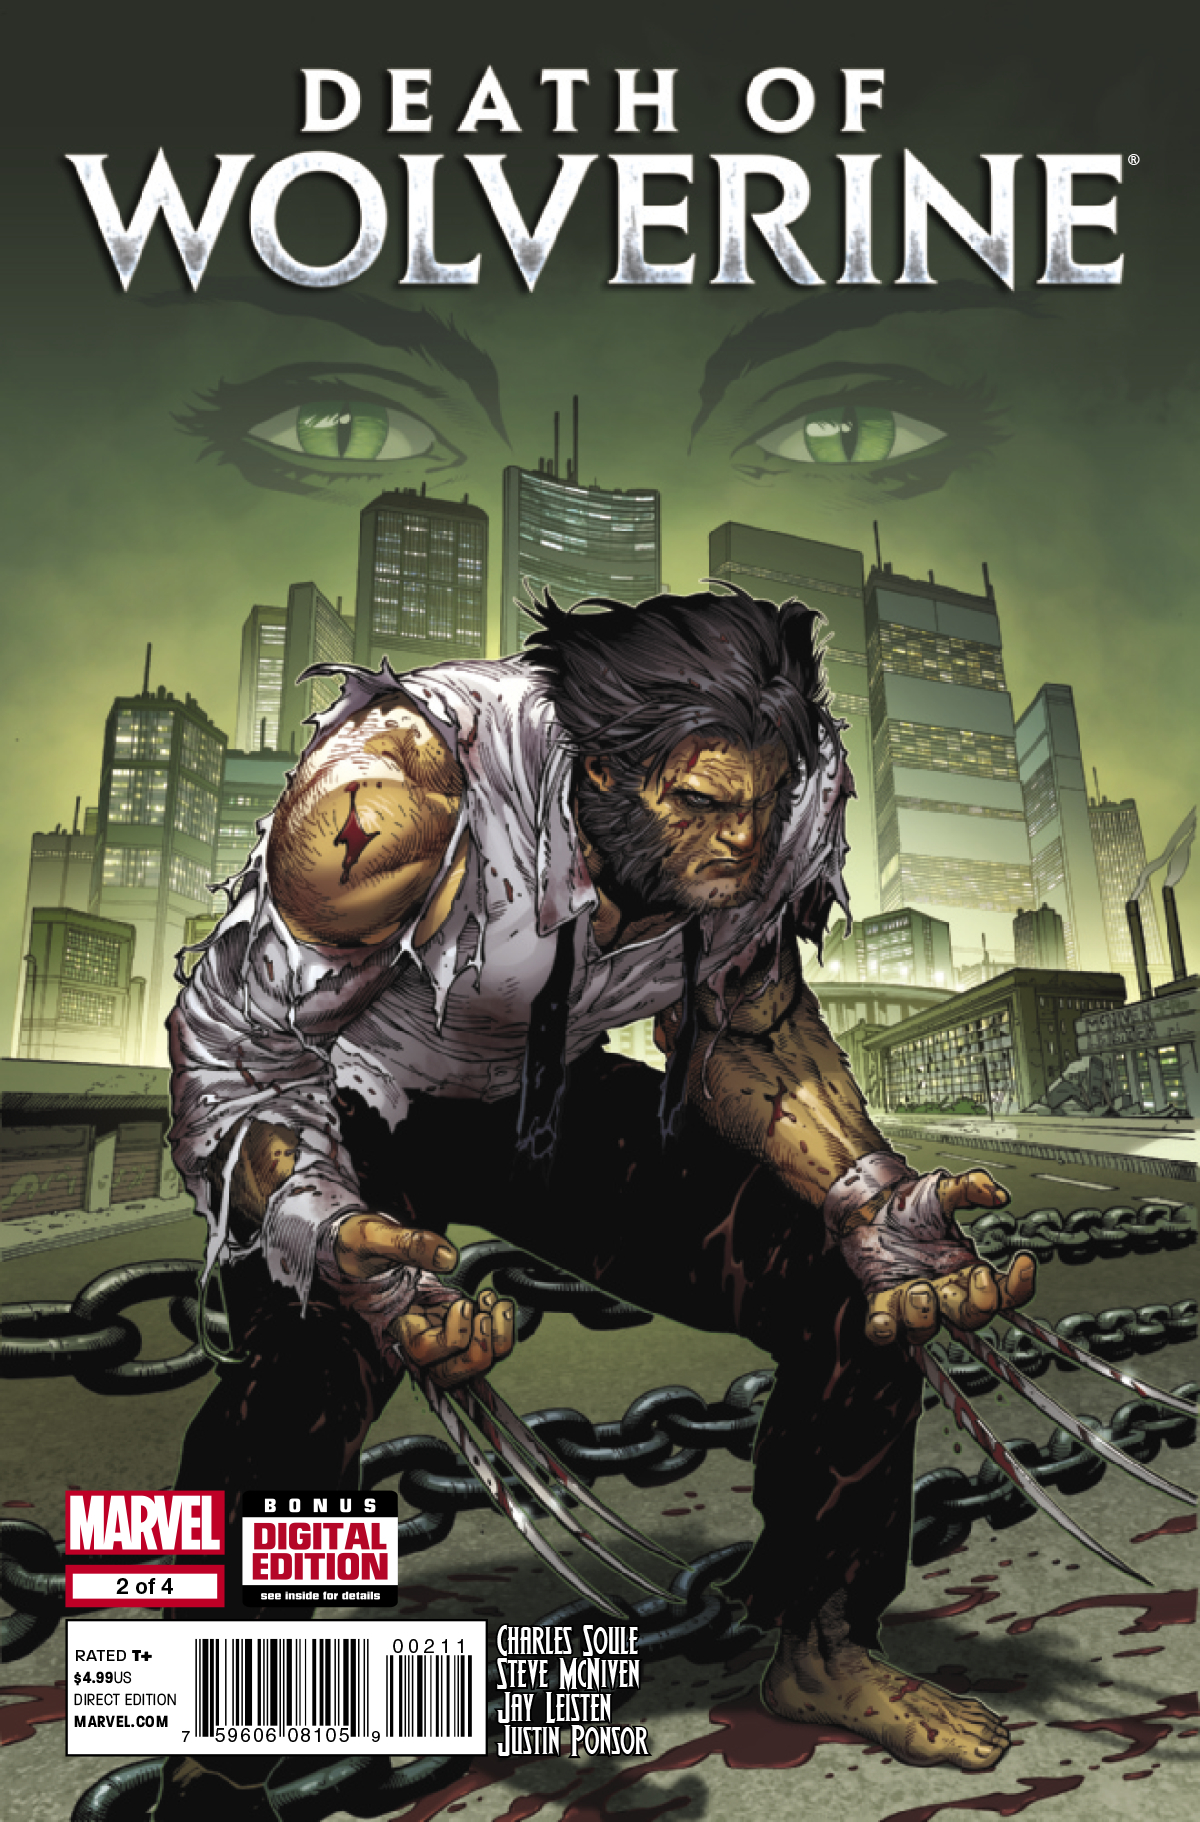 DEATH OF WOLVERINE #2 (OF 4)